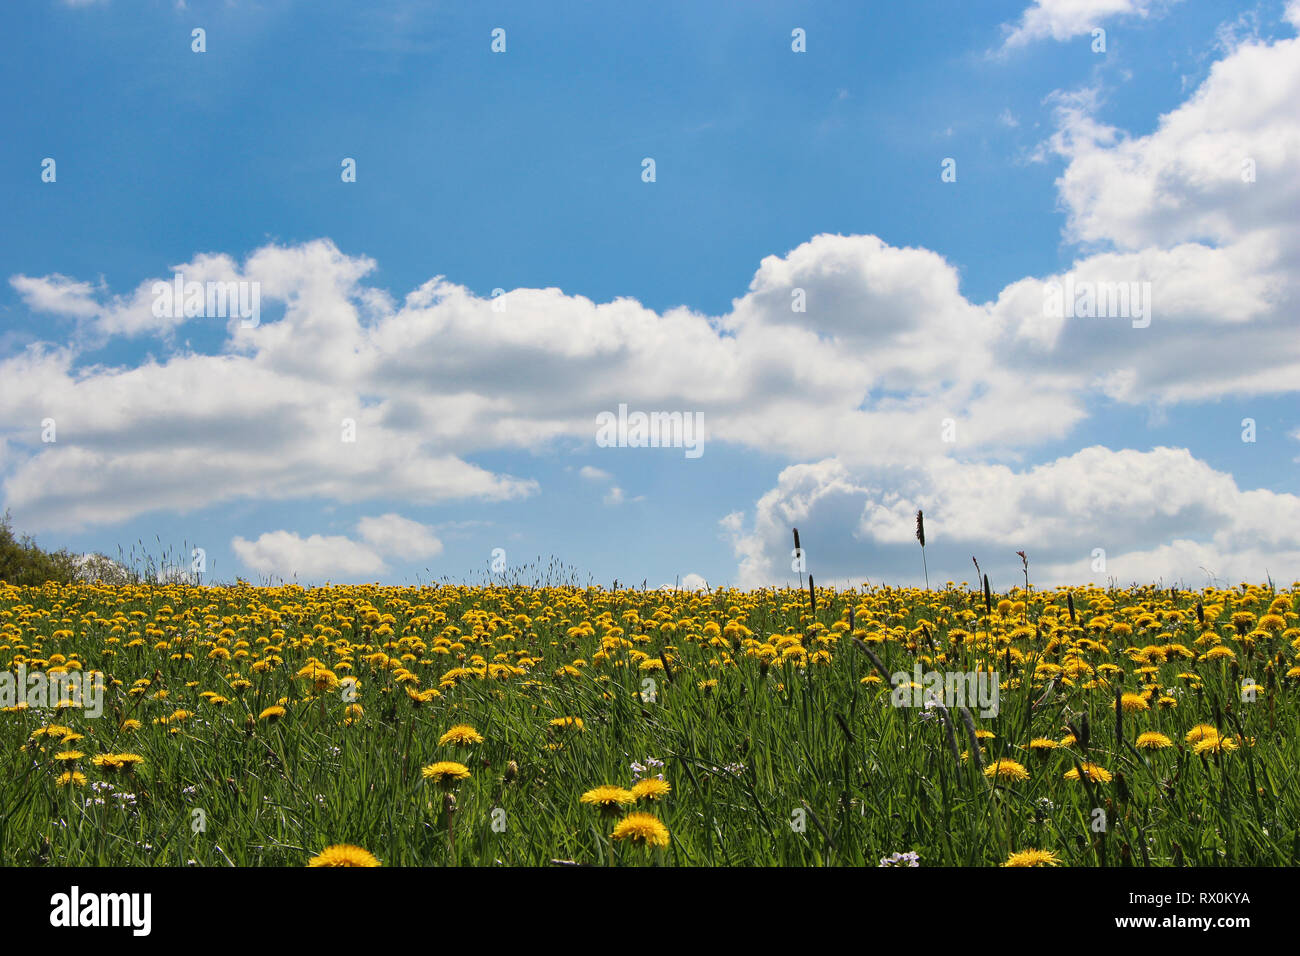 Field with yellow dandelions on a hill and blue sky Stock Photo